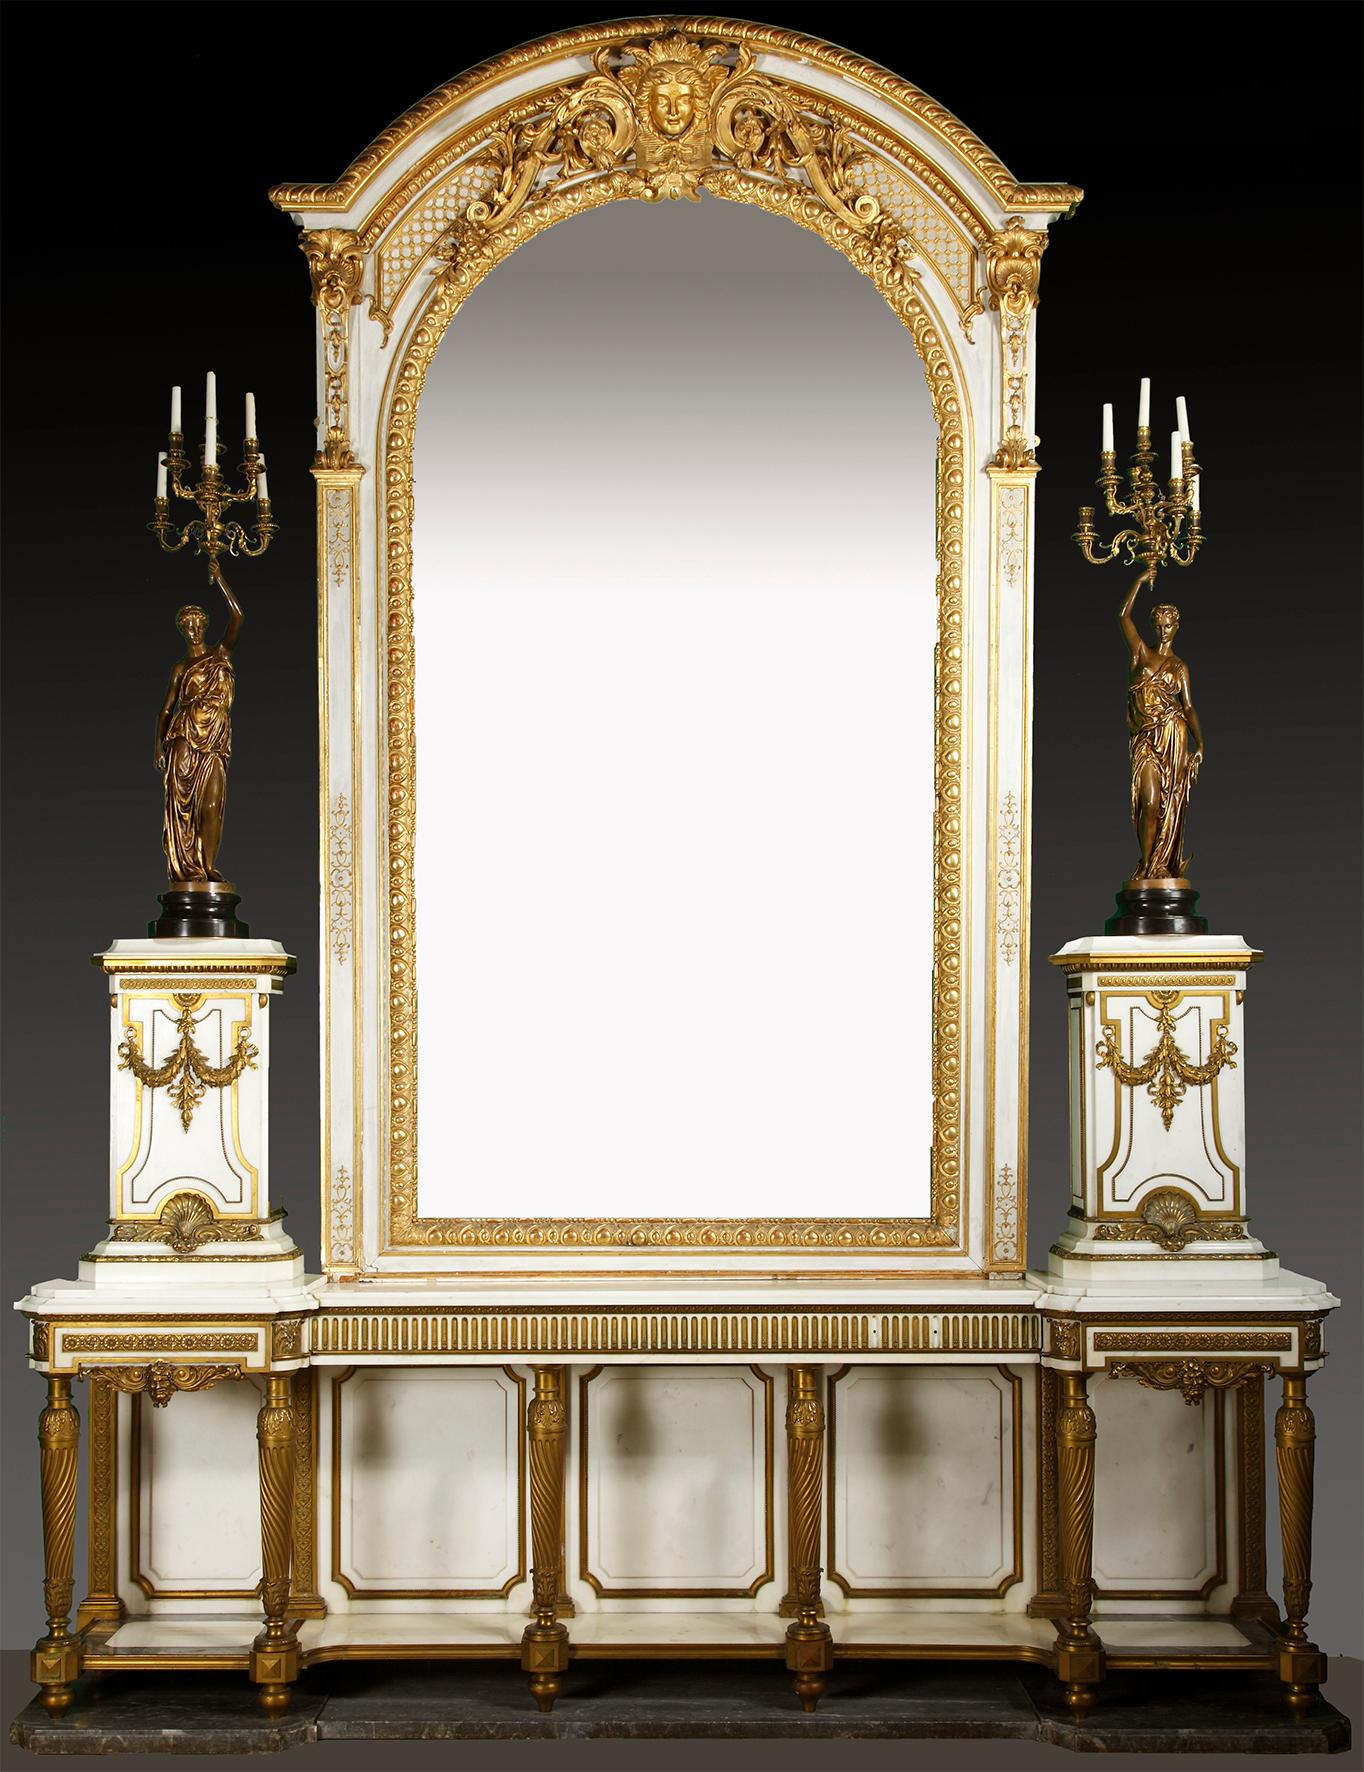 Total height with mirror: 383 cm (151 in.)
Console : Height : 97 cm (38 in.) ; Length : 291 cm (114 in.) ; Depth : 47 cm (18 in.)
Height with pedestals : 178 cm (70 in.) – Width of pedestals tops : 36 x 23 cm (14 x 9 in.)
Provenance: Hôtel de